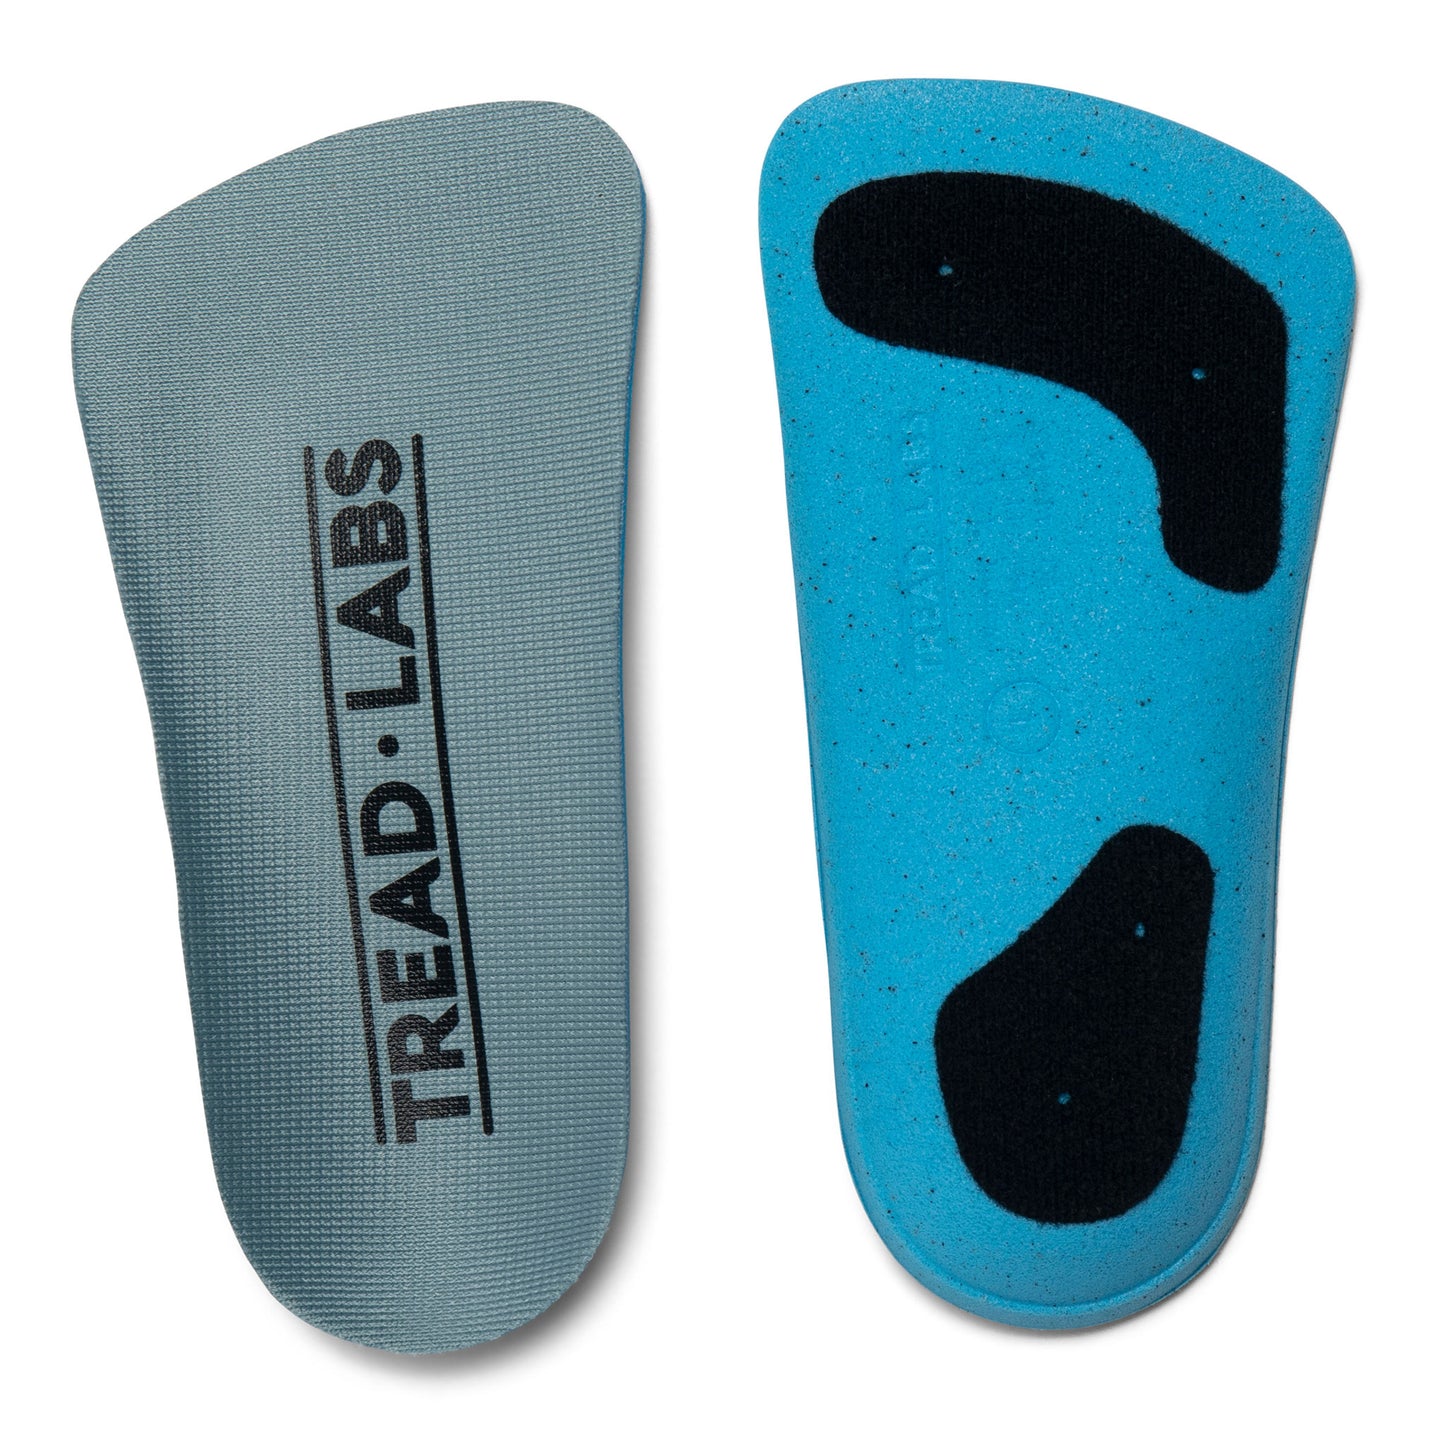 Pace Short Insoles Replacement Top Covers From Tread Labs